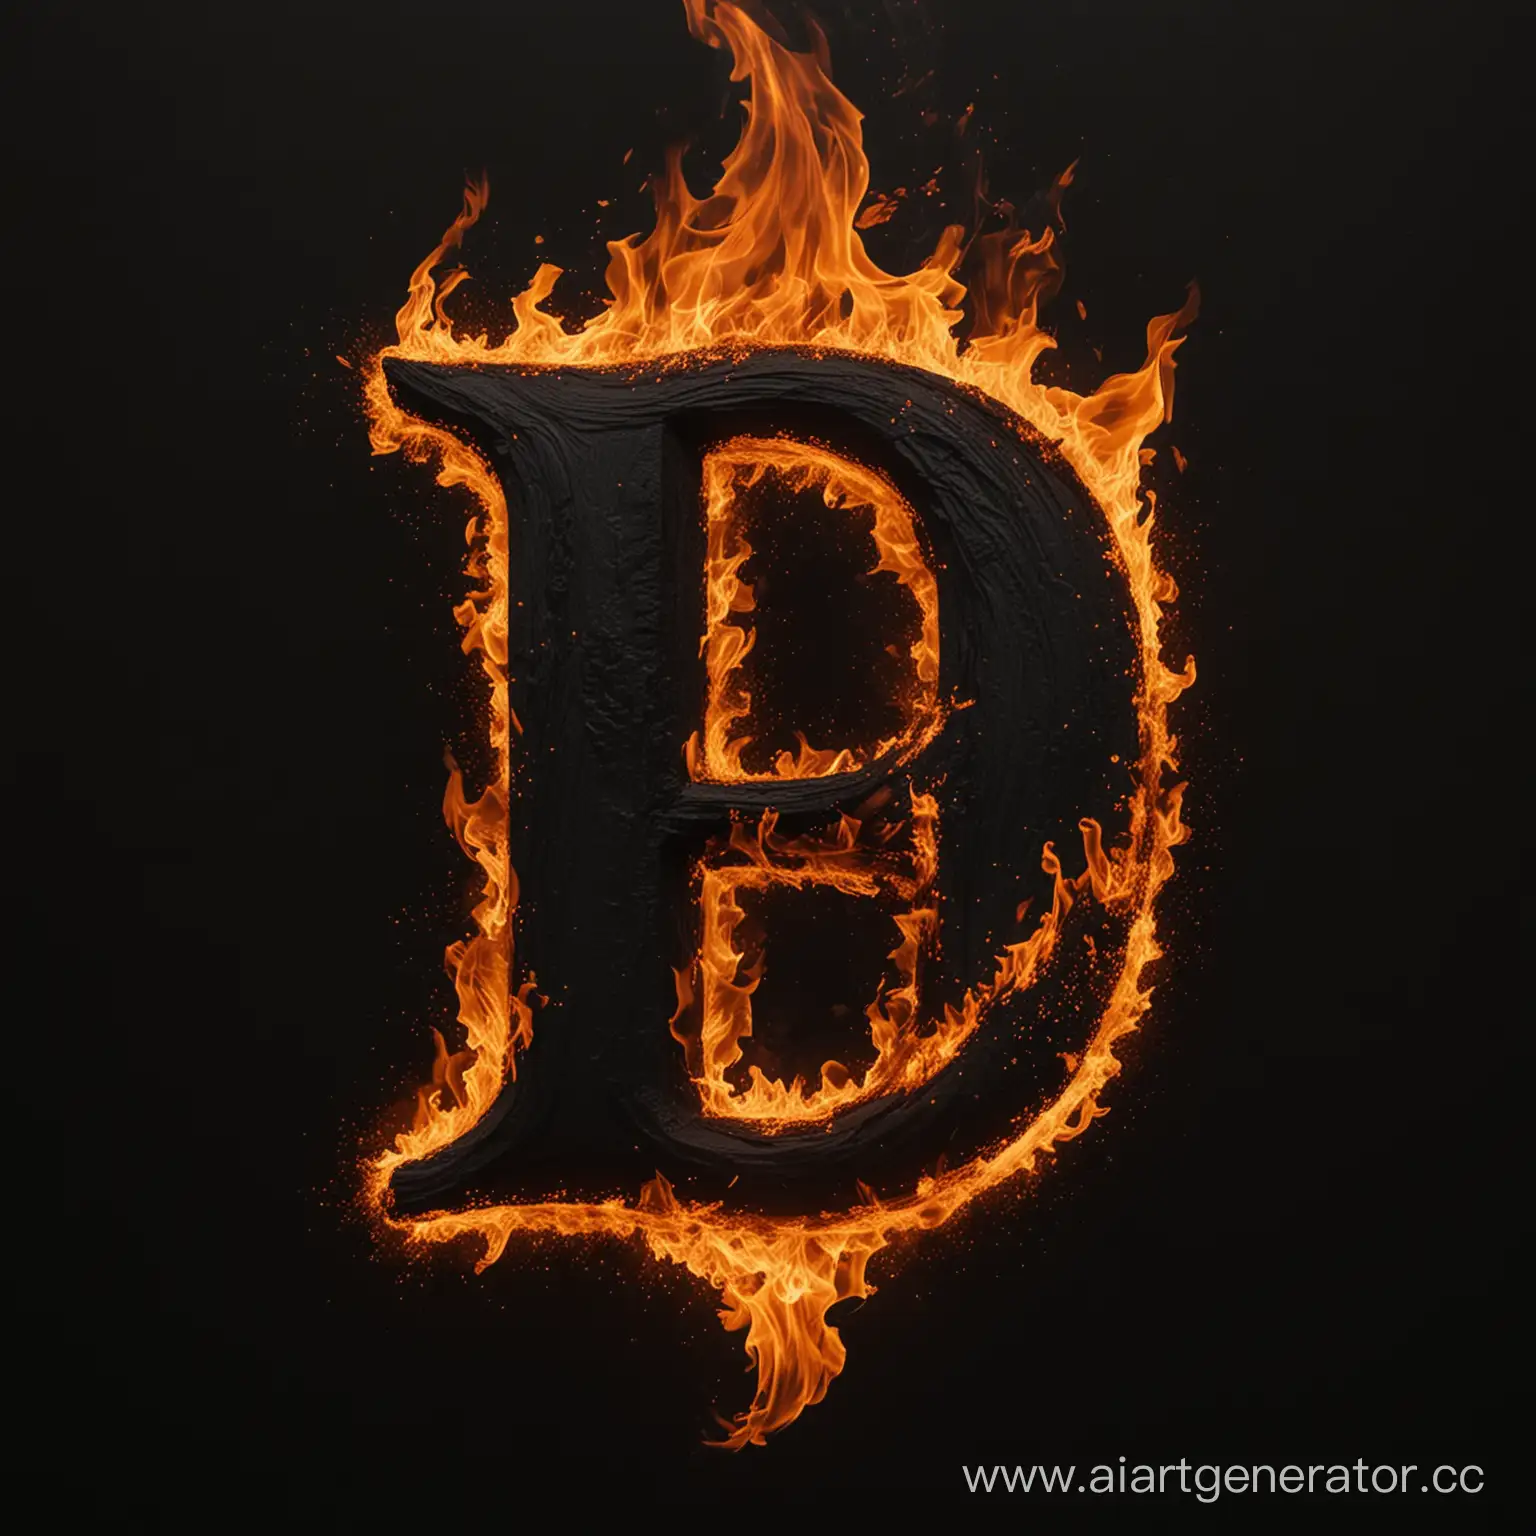 The letter "D" depicted as fire on a black background.